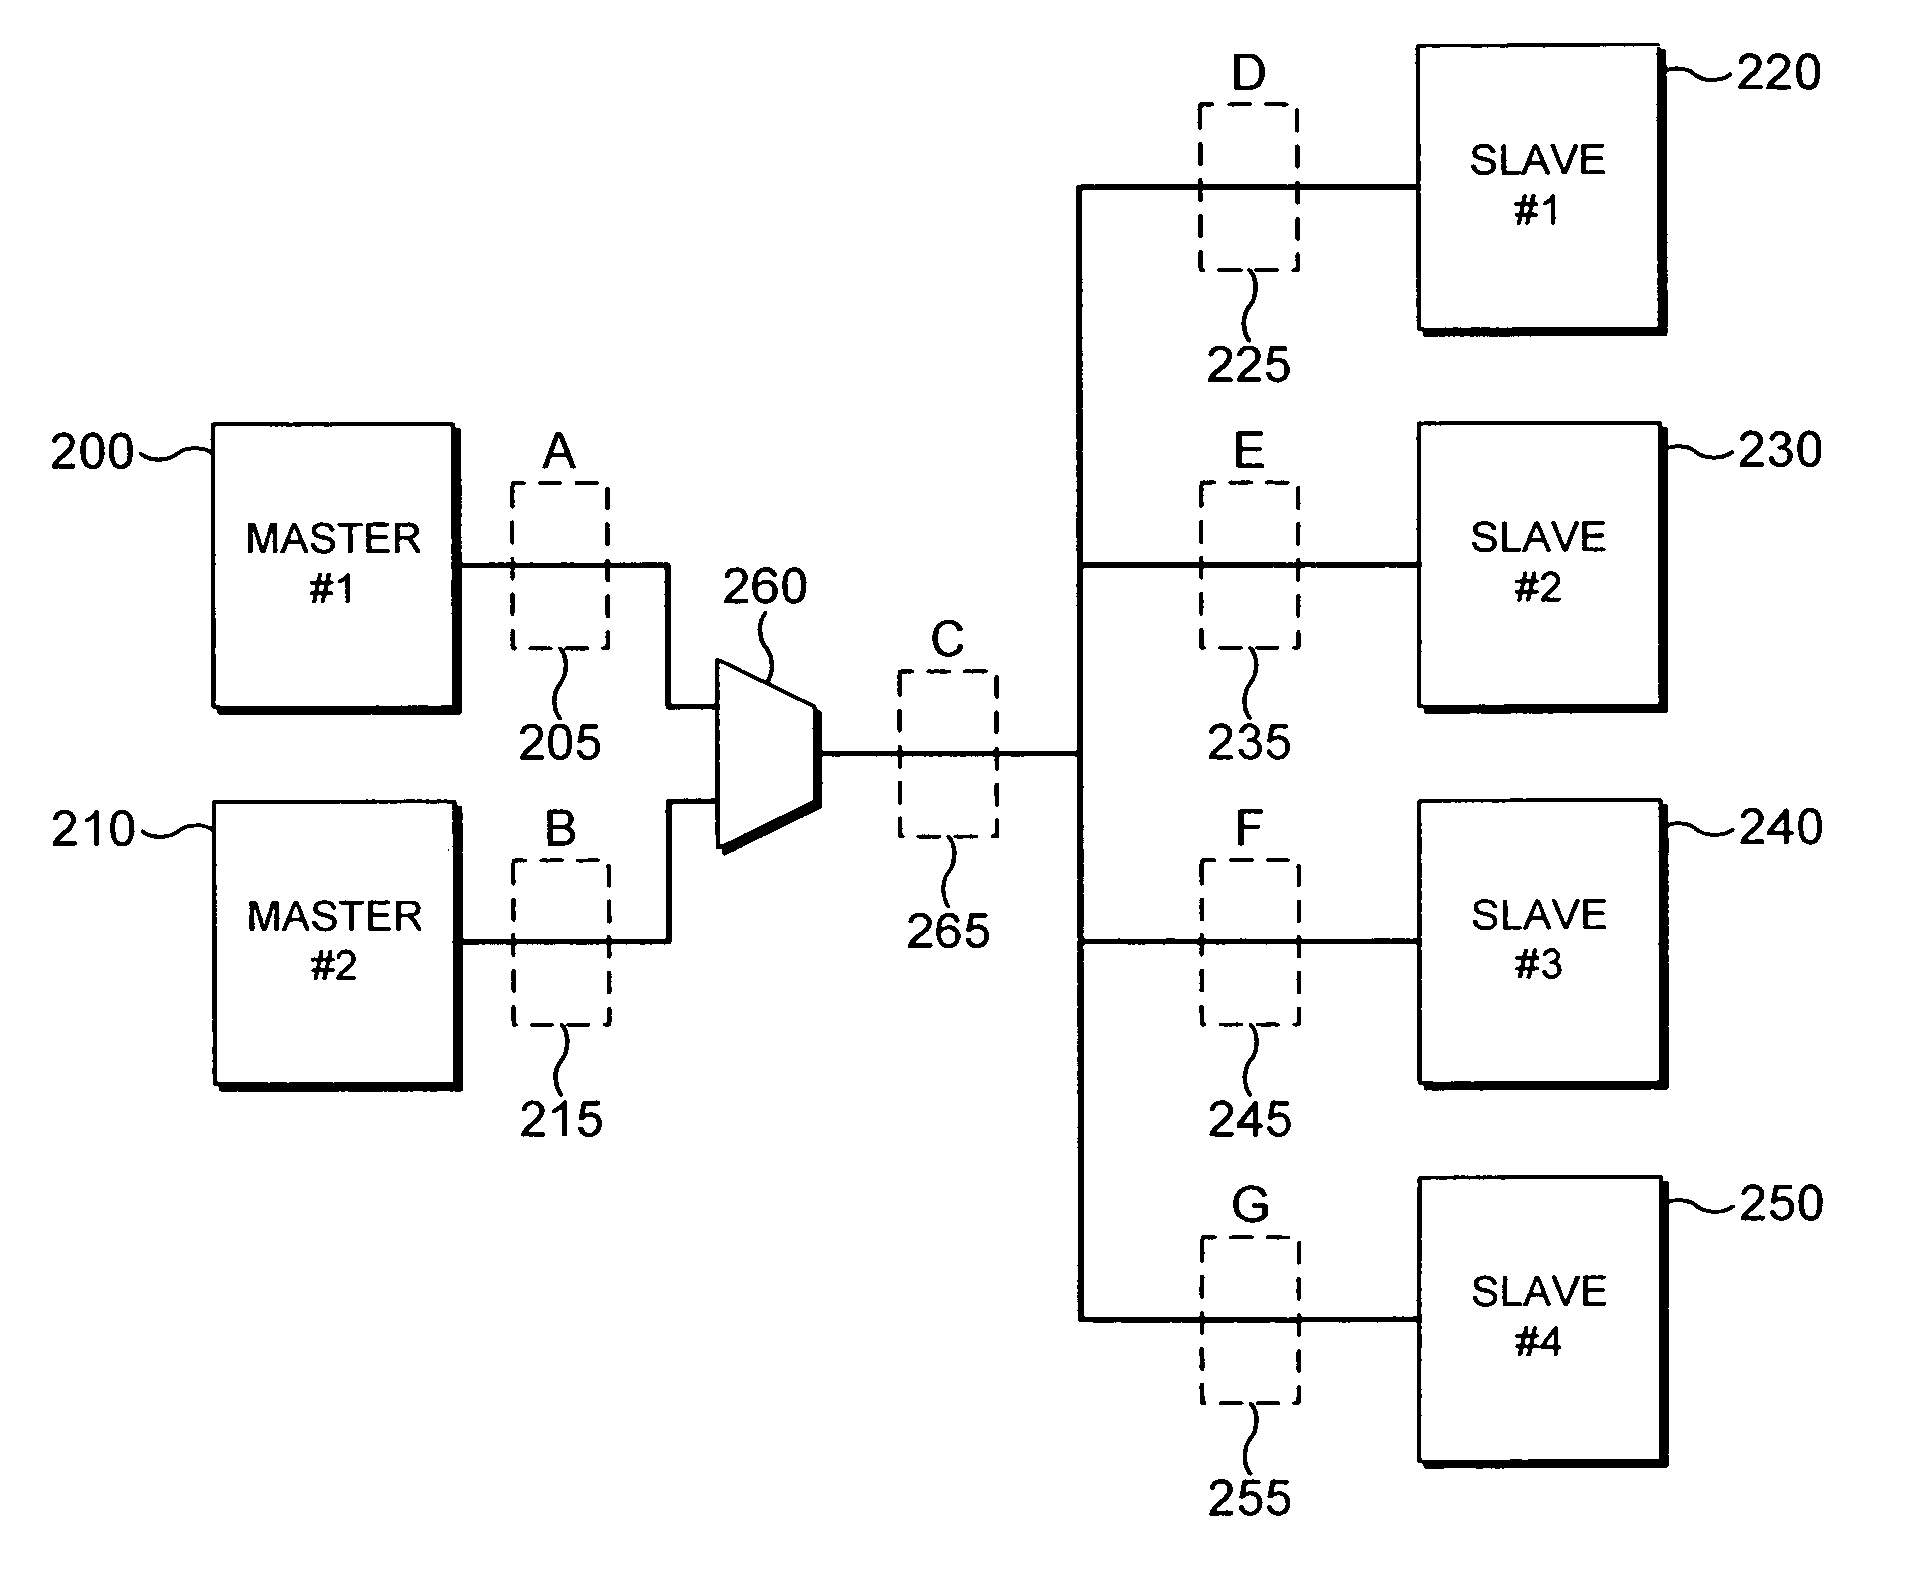 Flexibility of design of a bus interconnect block for a data processing apparatus